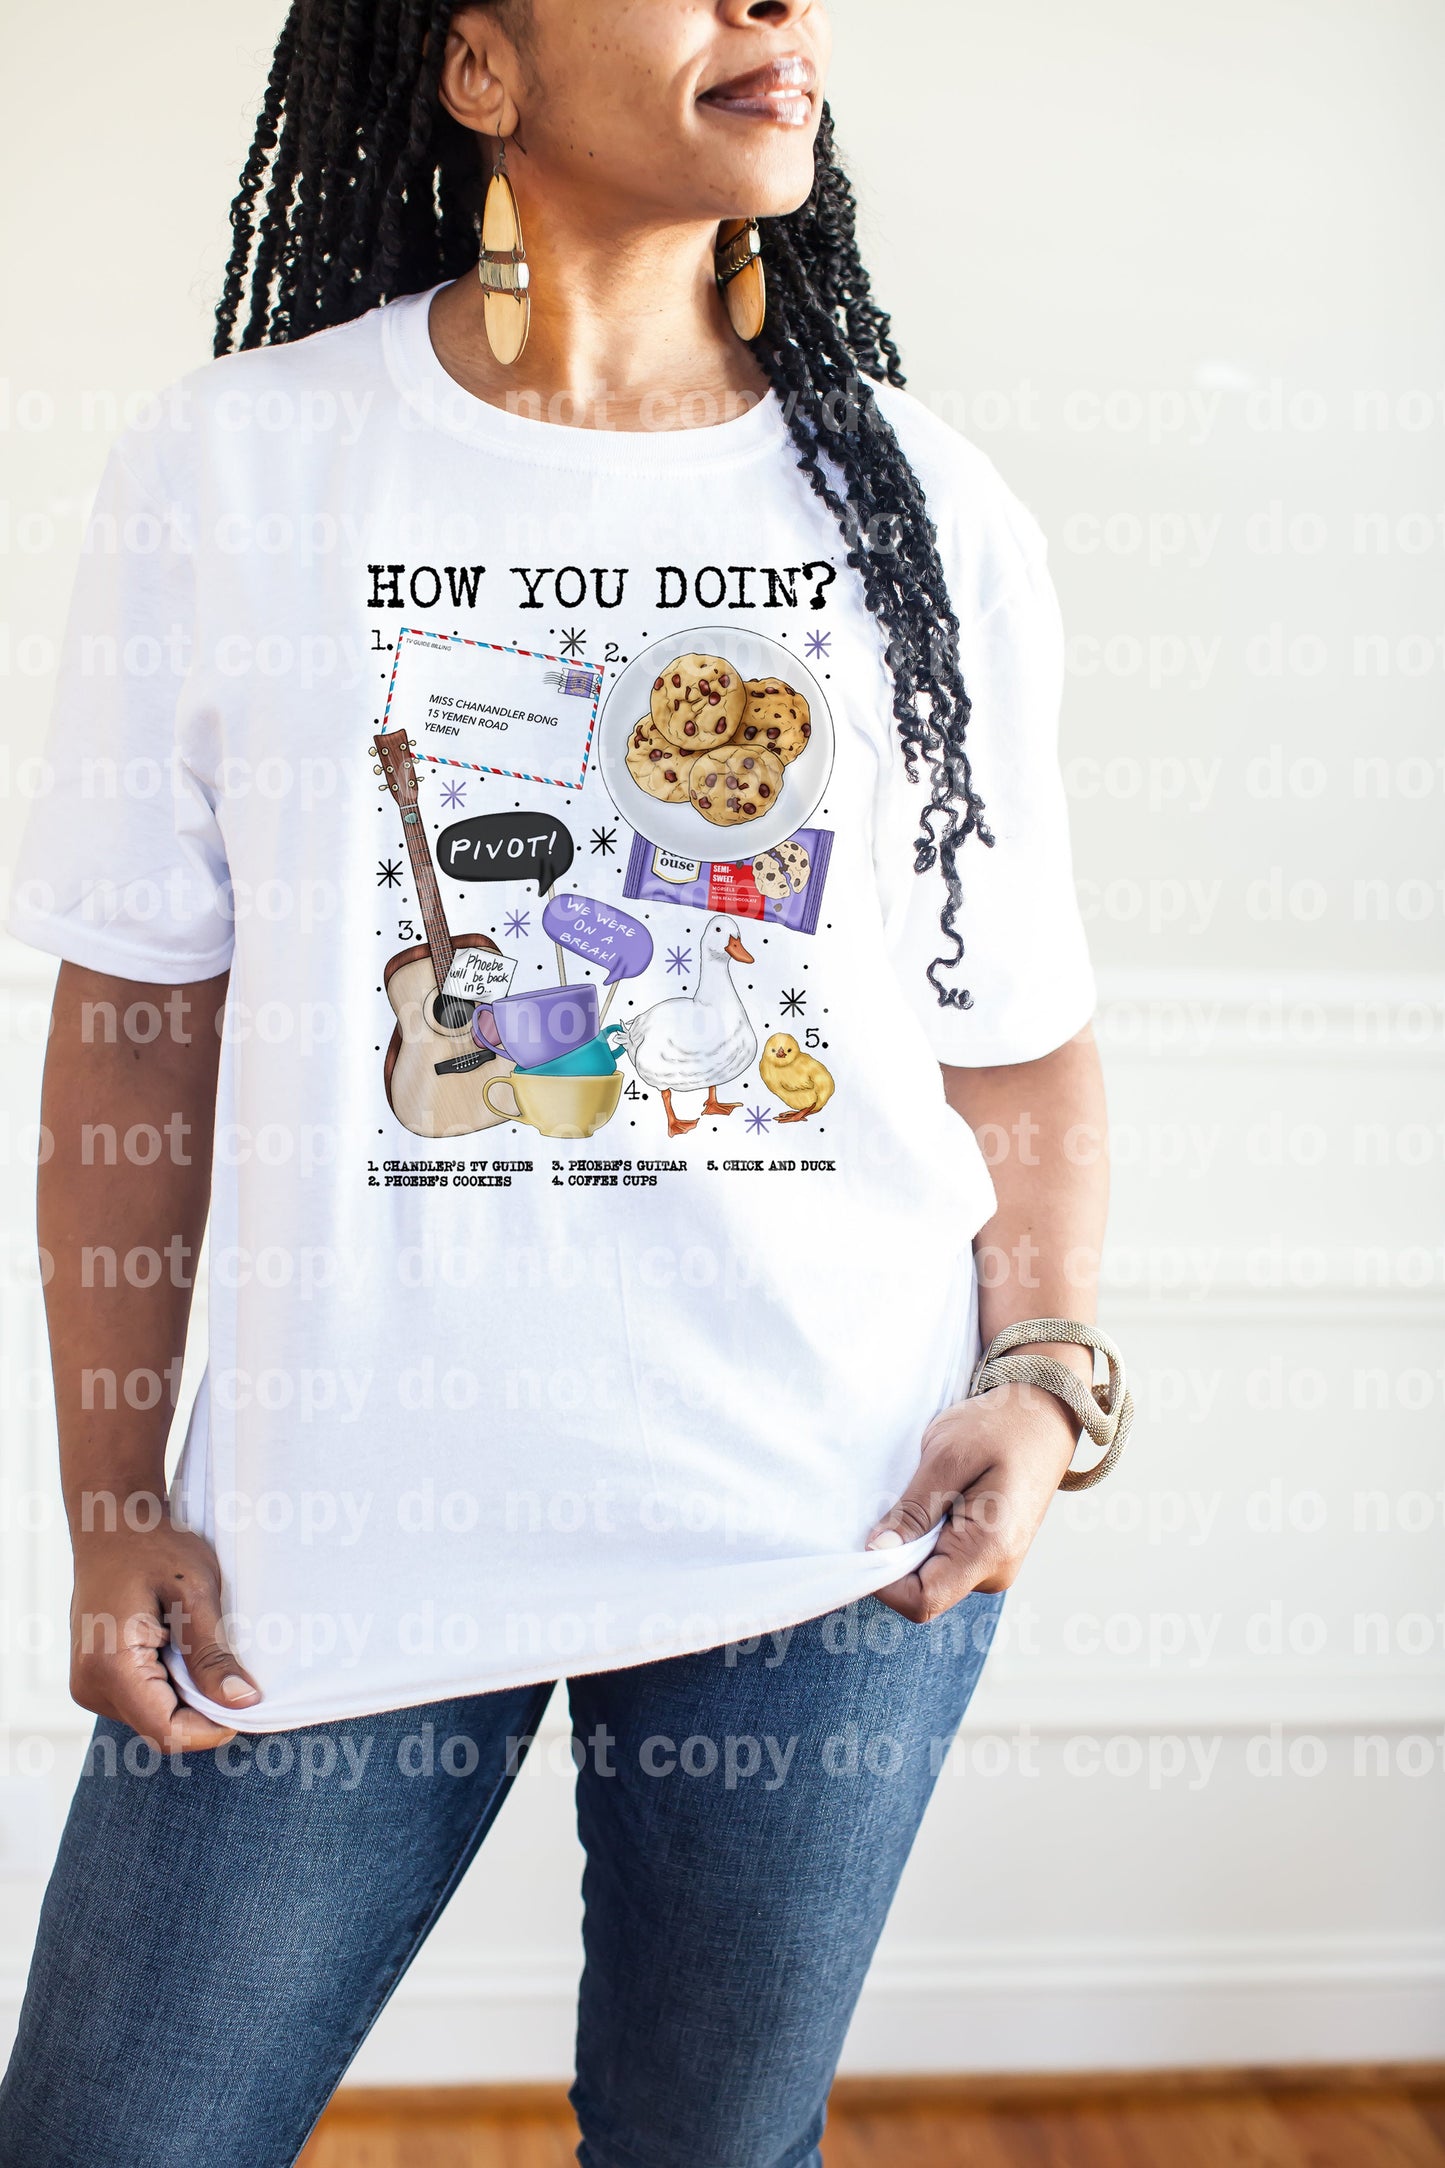 How You Doin' Chart Dream Print or Sublimation Print